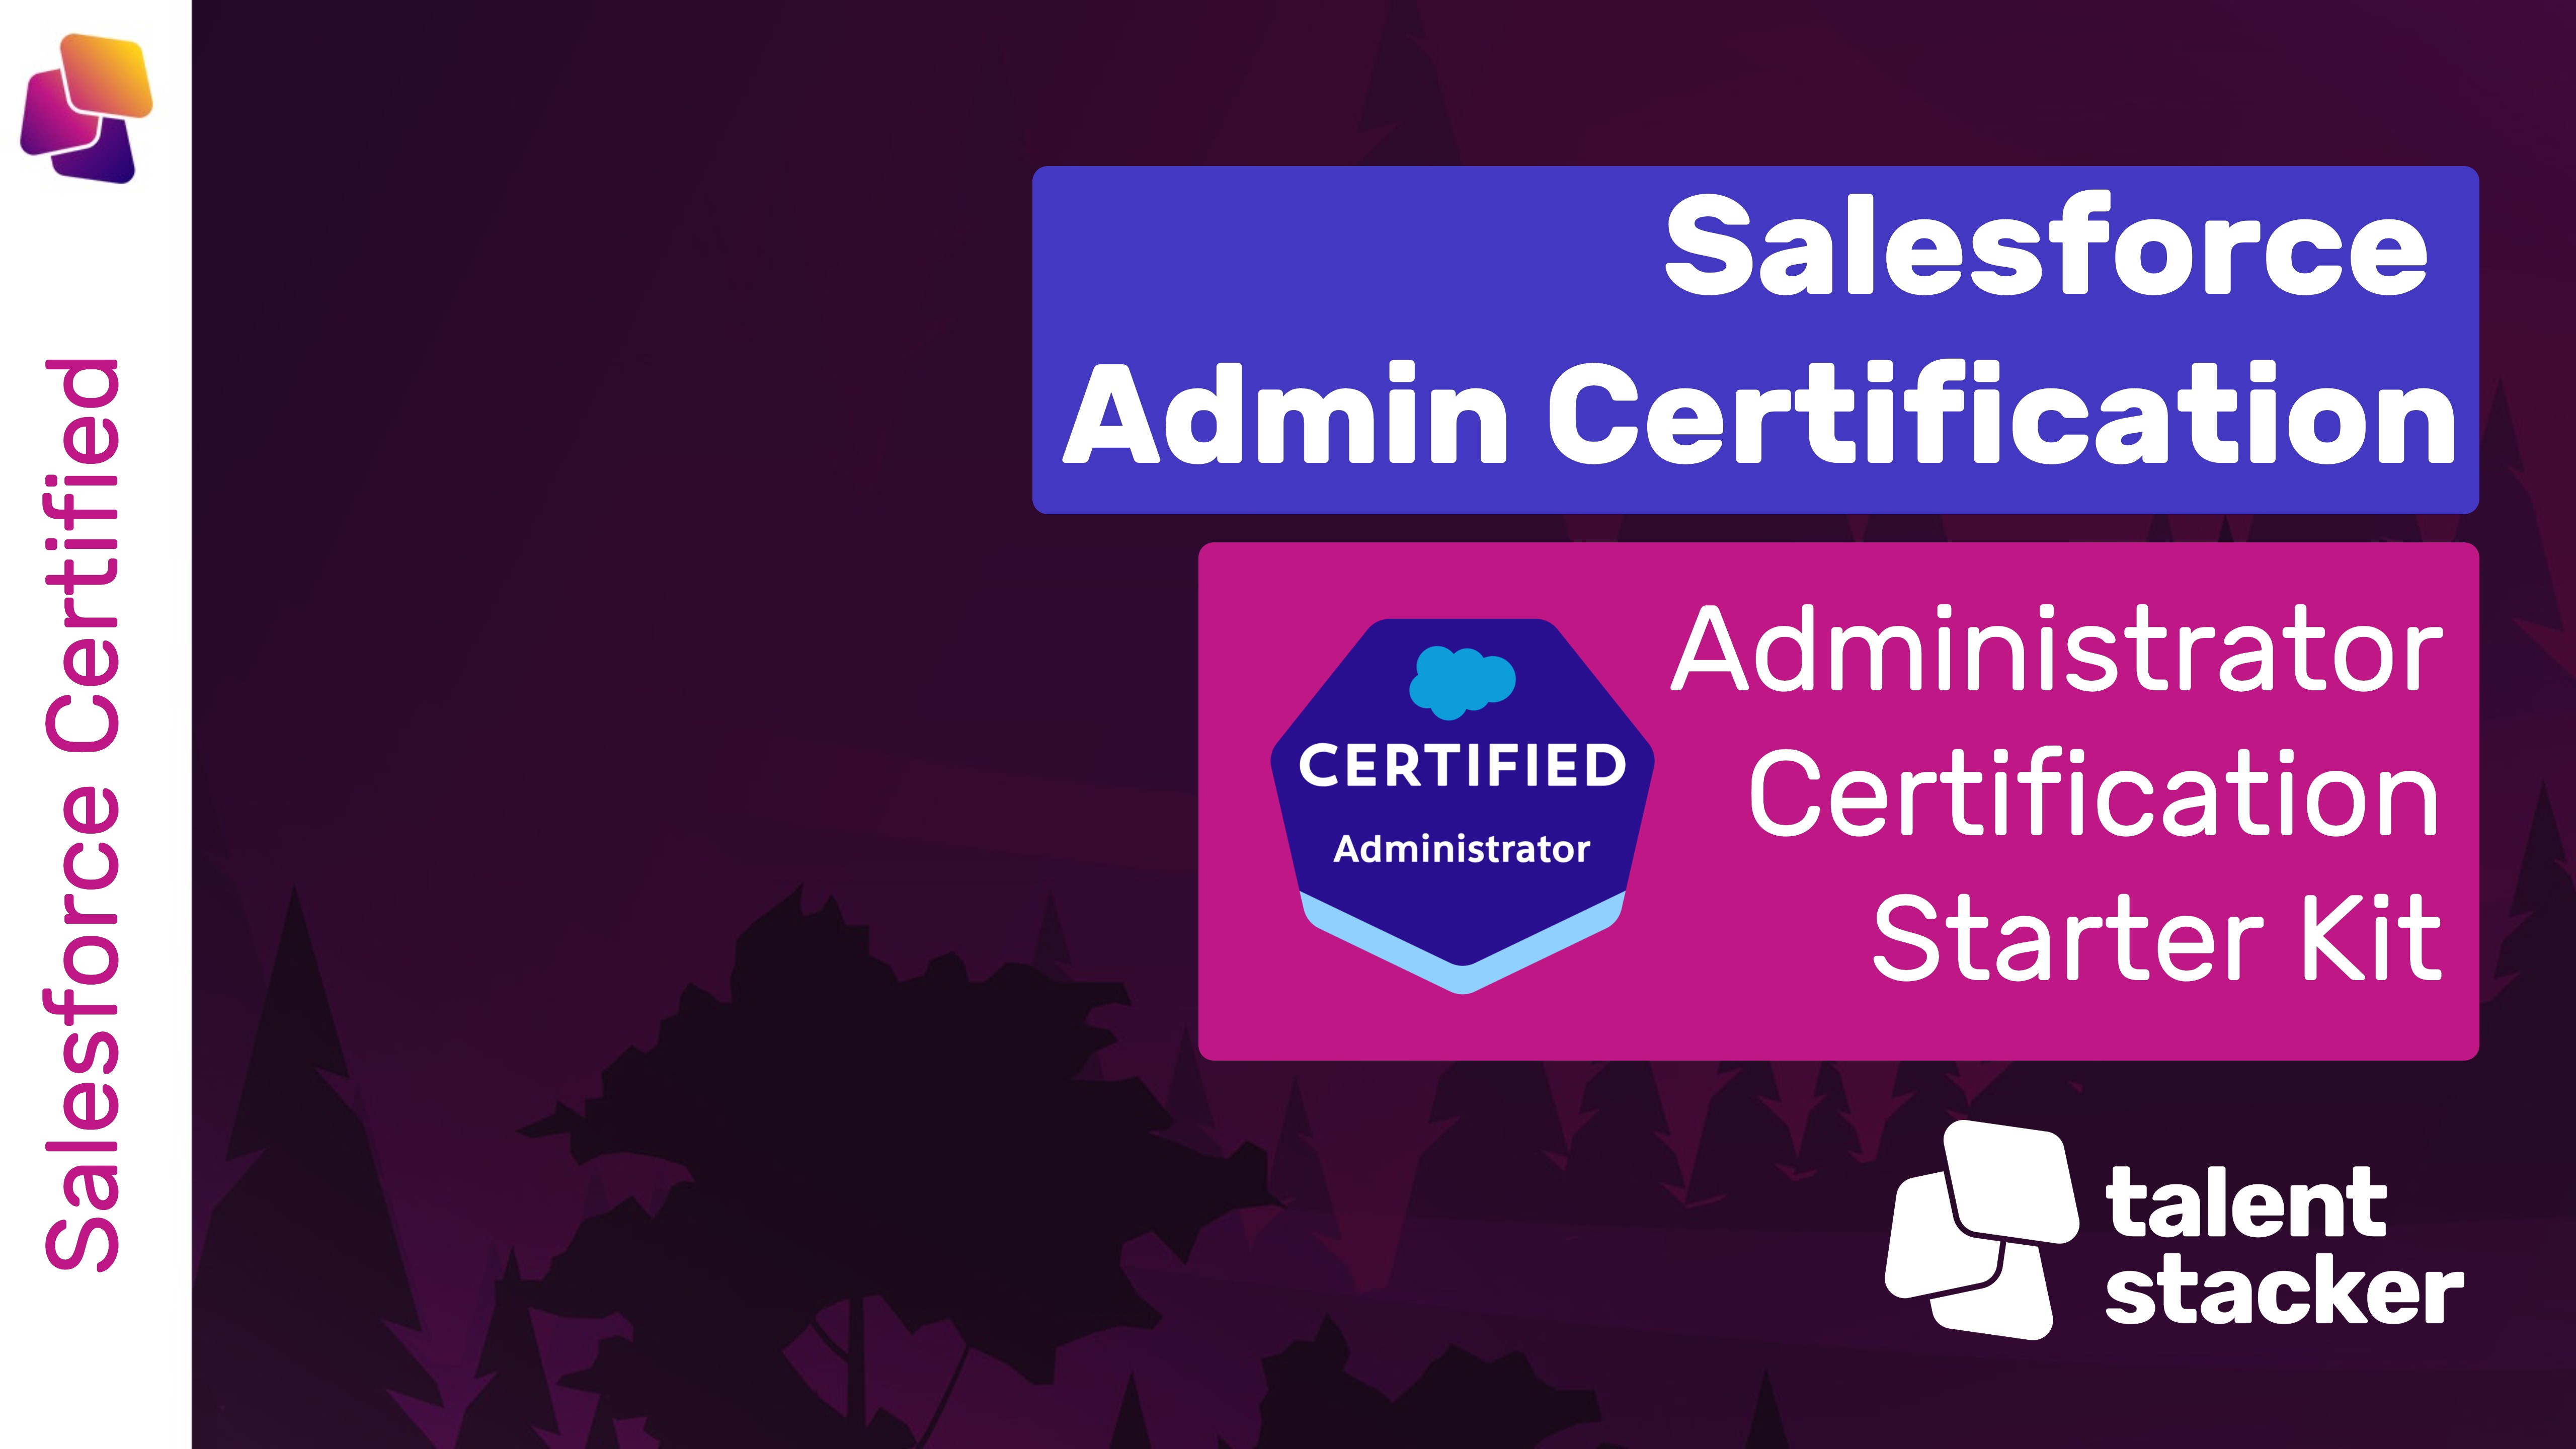 8. Score Big Savings on Salesforce Certification with These Coupon Codes - wide 1